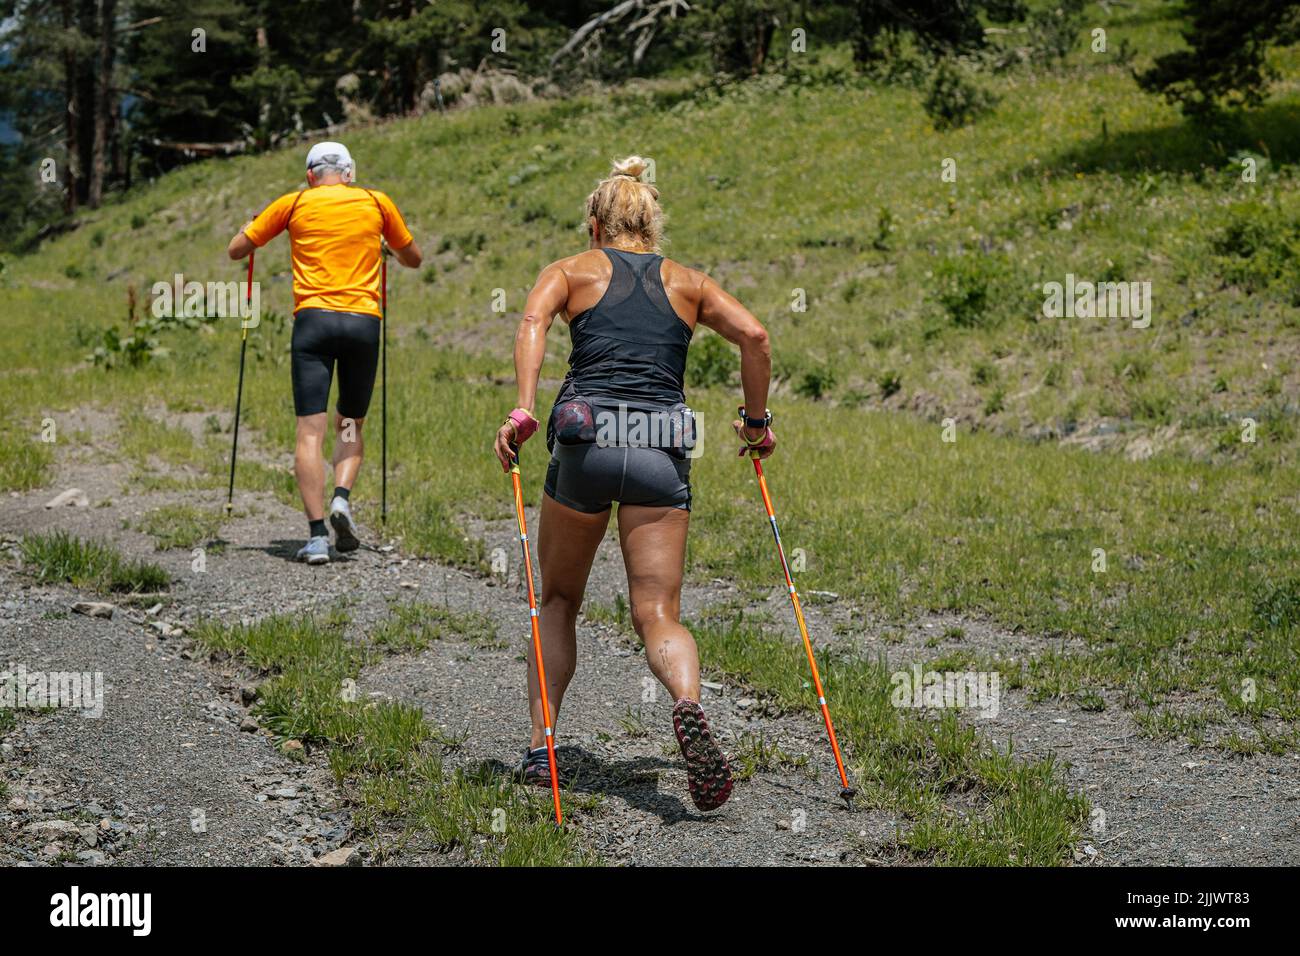 woman and man nordic walking in trail Stock Photo